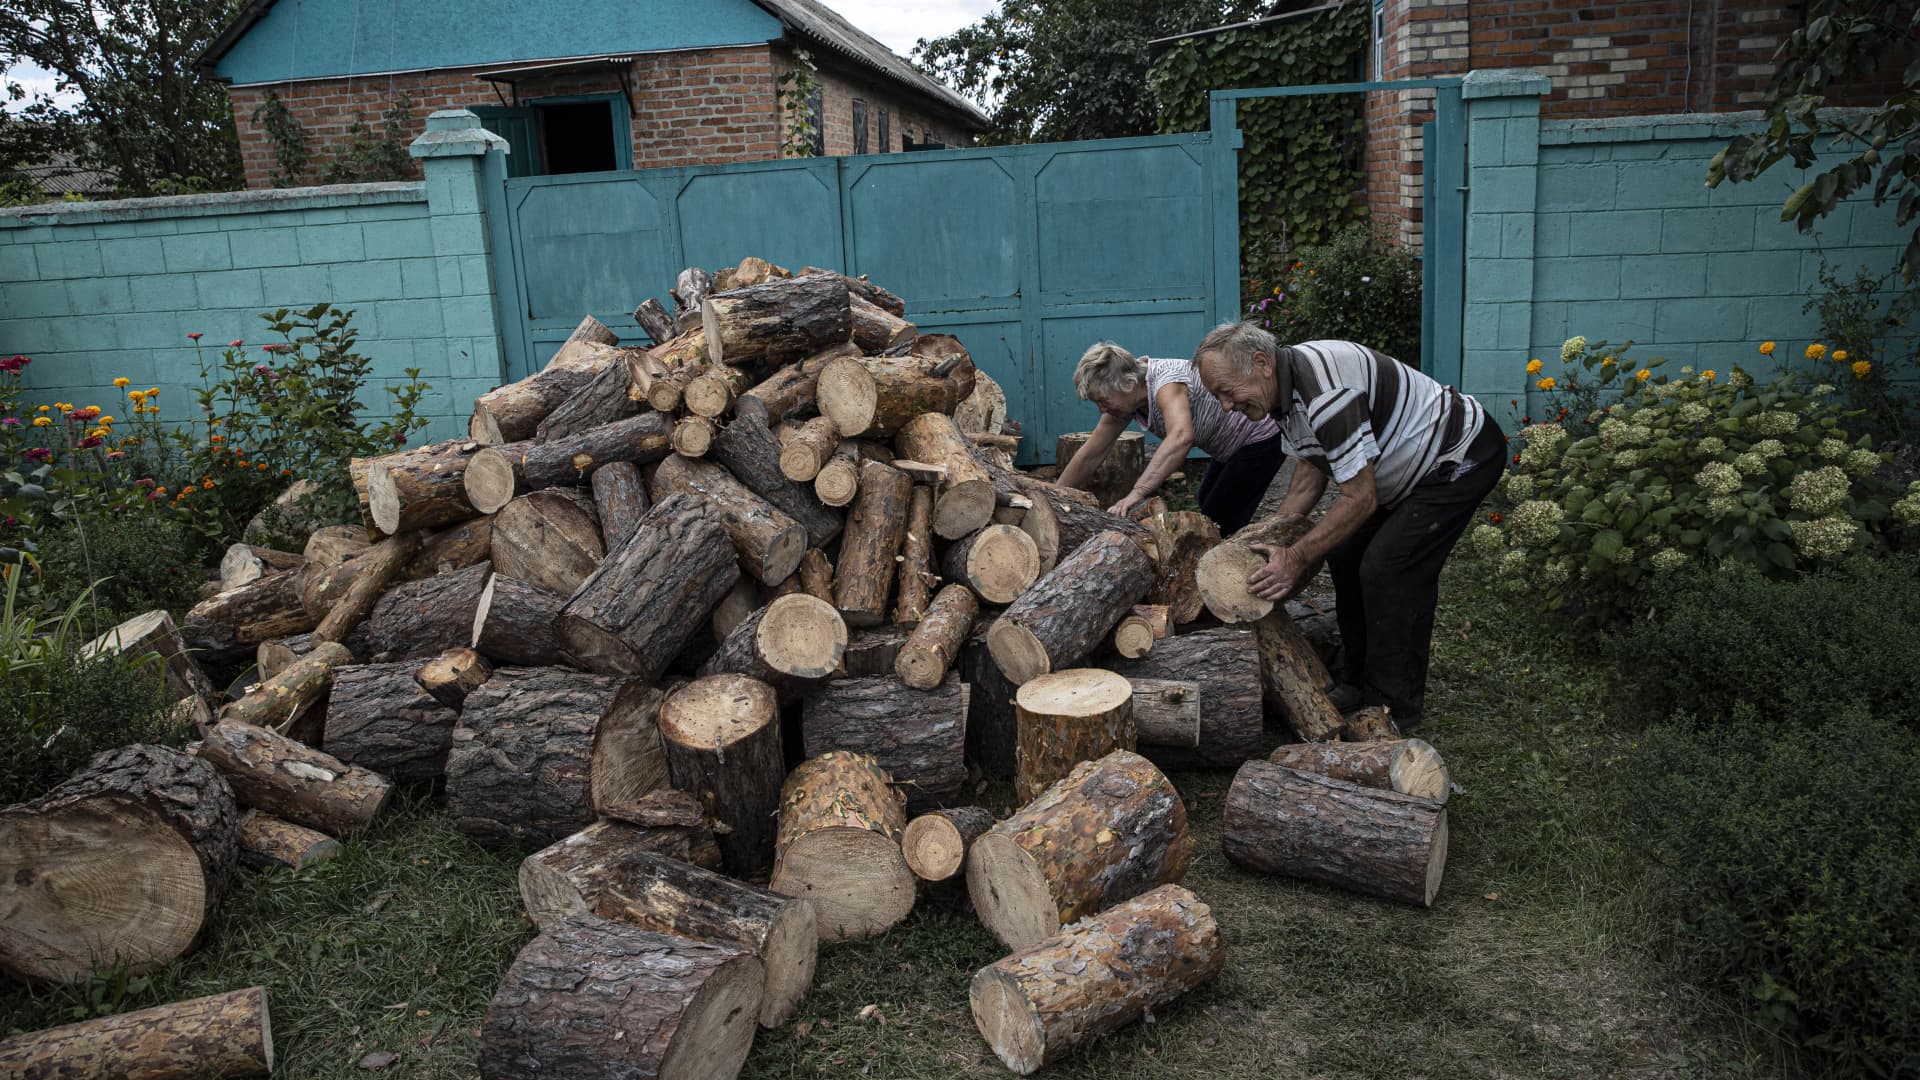 Ukrainians are prepare for the cold winter and stocking up on firewood in Kharkiv, Ukraine, September 13, 2022.